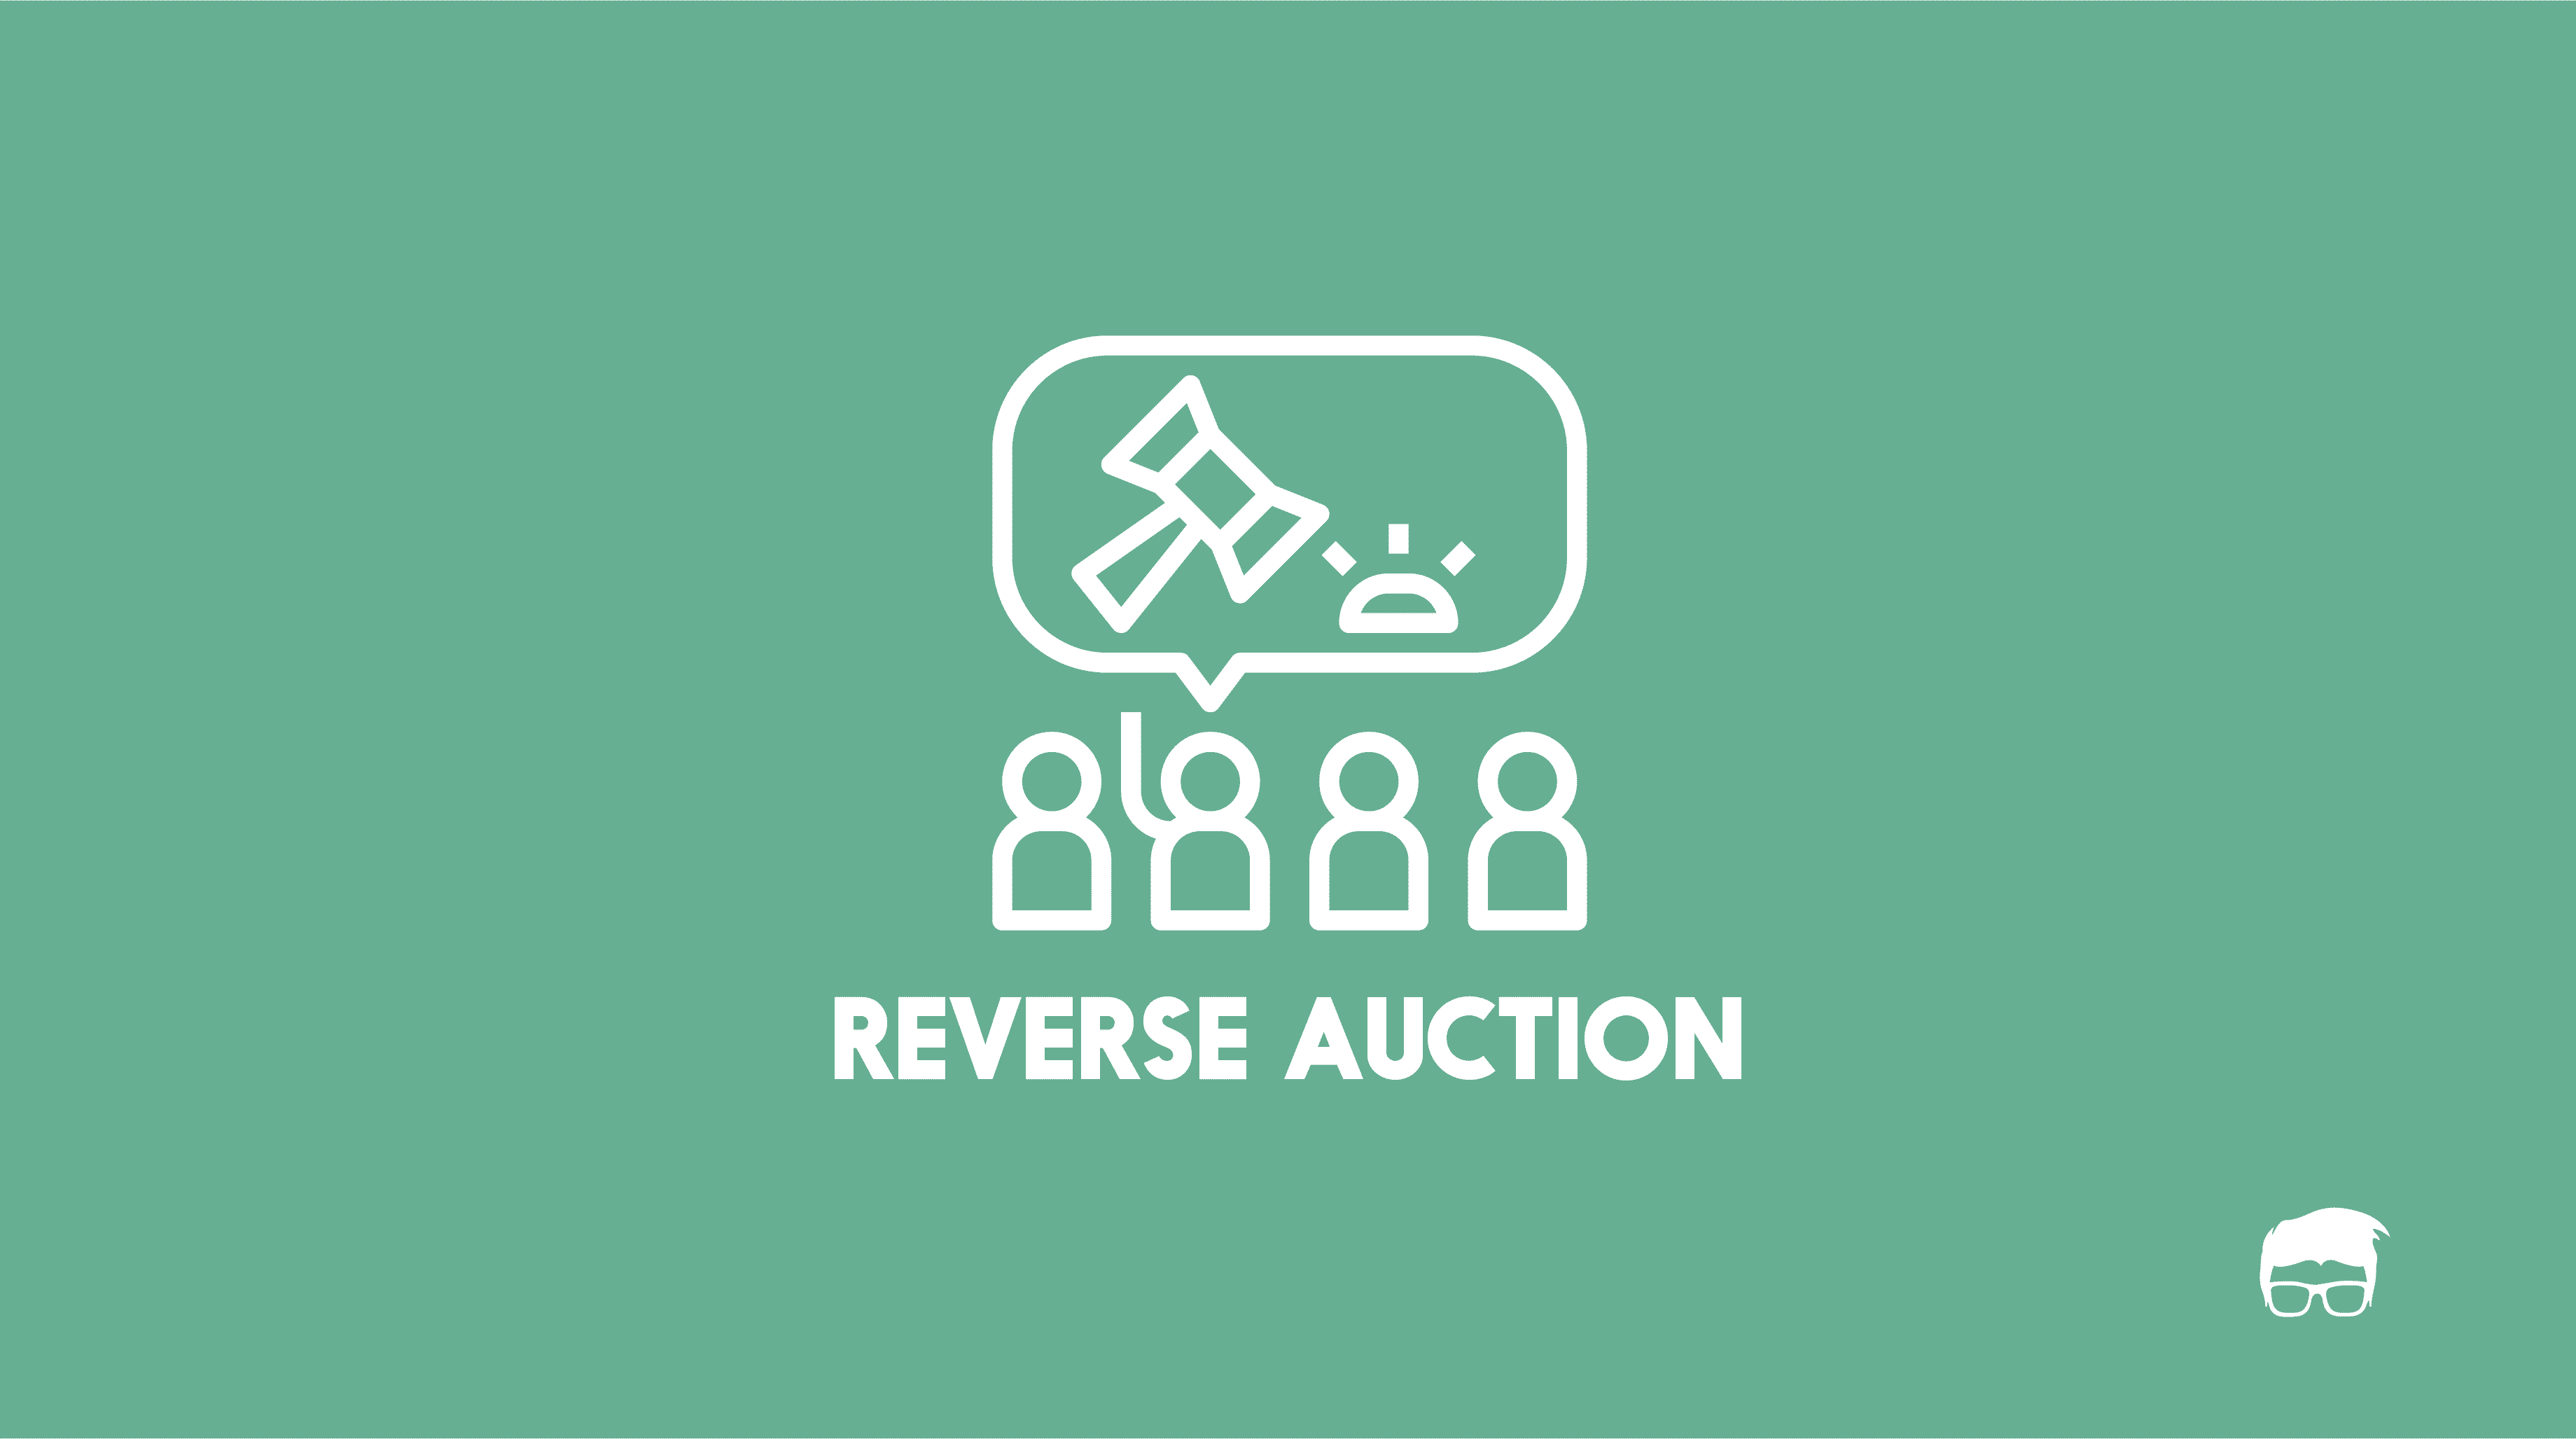 What Is A Reverse Auction & How Does It Work?